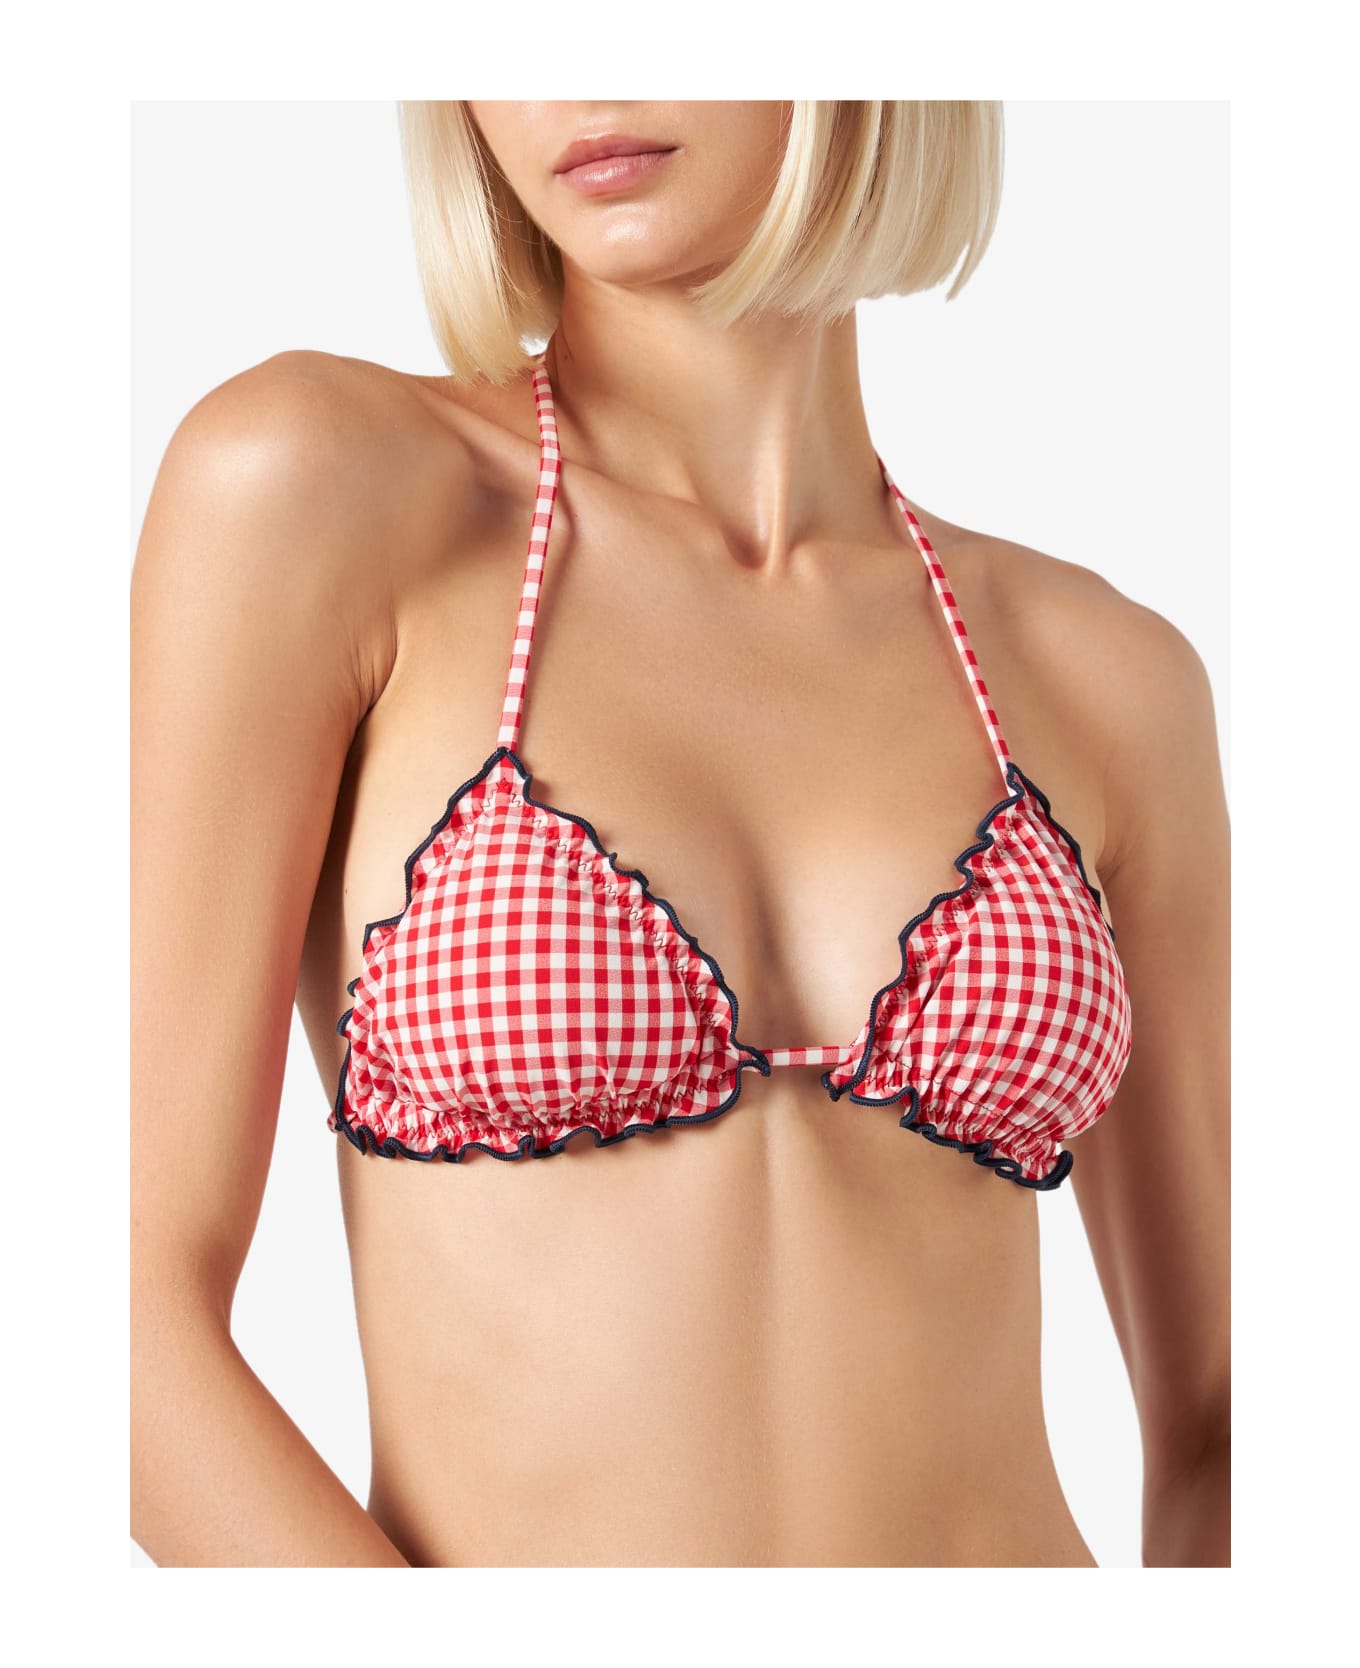 MC2 Saint Barth Woman Triangle Top Swimsuit With Gingham Print - RED